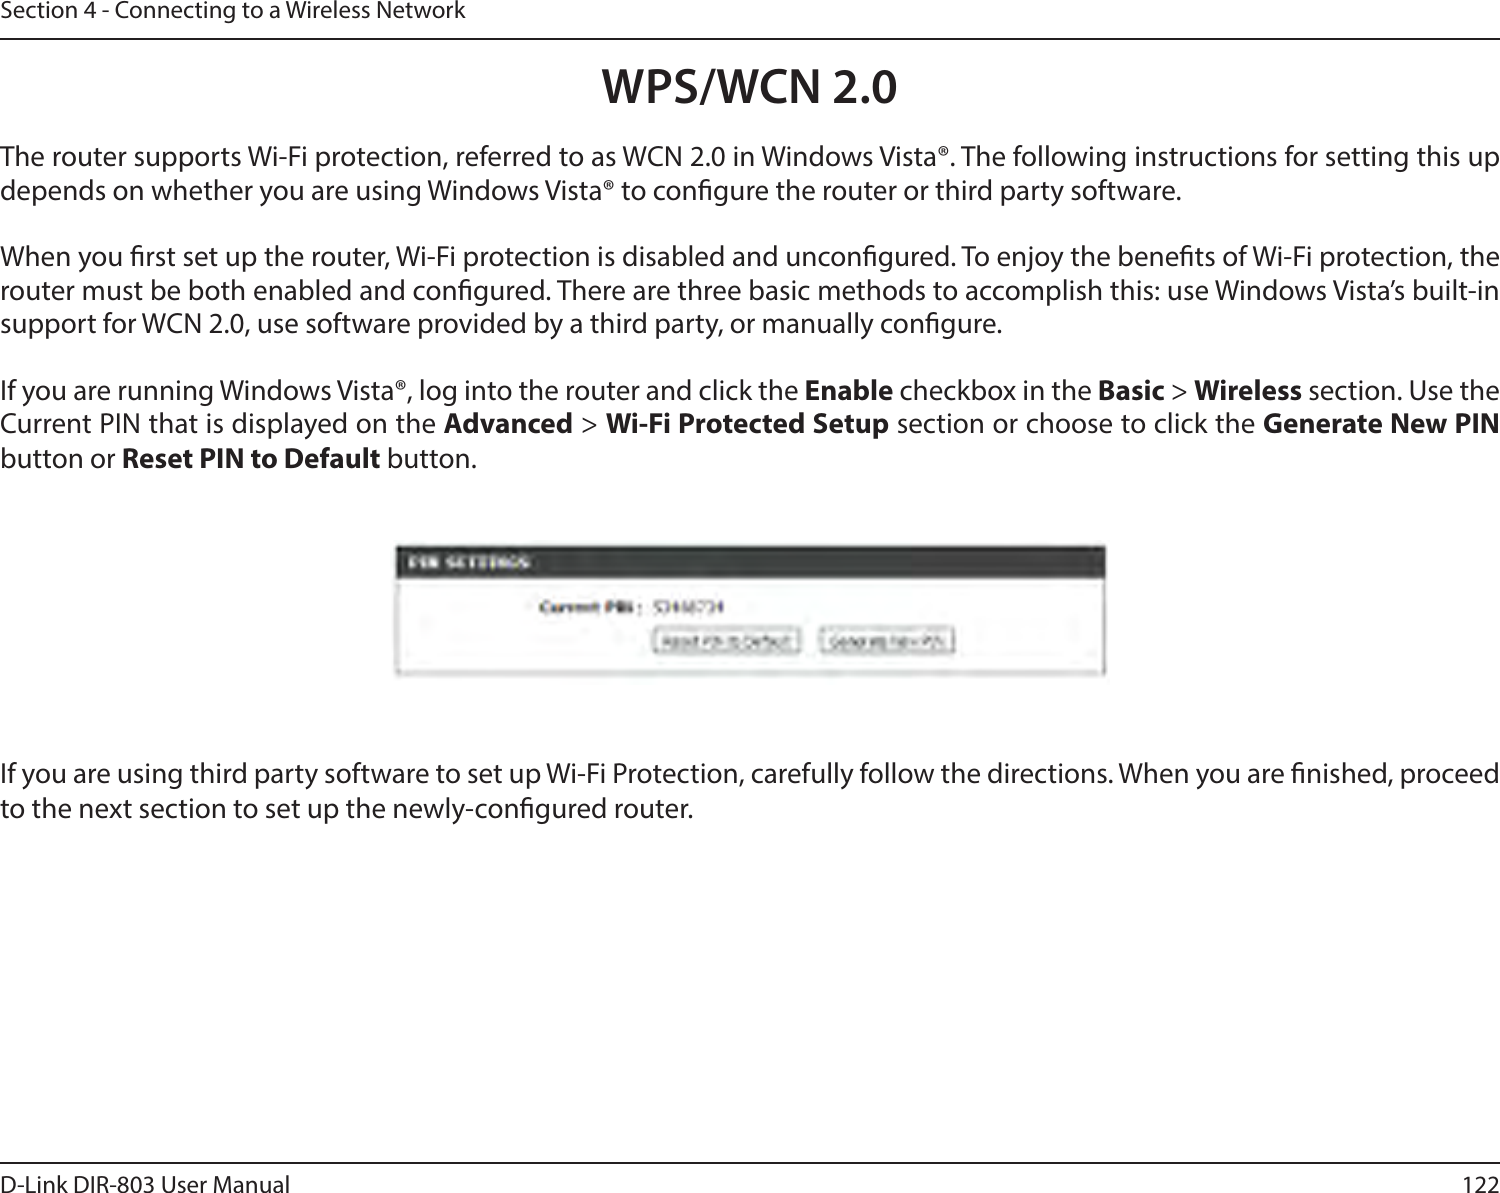 122D-Link DIR-803 User ManualSection 4 - Connecting to a Wireless NetworkWPS/WCN 2.0The router supports Wi-Fi protection, referred to as WCN 2.0 in Windows Vista®. The following instructions for setting this up depends on whether you are using Windows Vista® to congure the router or third party software.        When you rst set up the router, Wi-Fi protection is disabled and uncongured. To enjoy the benets of Wi-Fi protection, the router must be both enabled and congured. There are three basic methods to accomplish this: use Windows Vista’s built-in support for WCN 2.0, use software provided by a third party, or manually congure. If you are running Windows Vista®, log into the router and click the Enable checkbox in the Basic &gt; Wireless section. Use the Current PIN that is displayed on the Advanced &gt; Wi-Fi Protected Setup section or choose to click the Generate New PIN button or Reset PIN to Default button. If you are using third party software to set up Wi-Fi Protection, carefully follow the directions. When you are nished, proceed to the next section to set up the newly-congured router. 